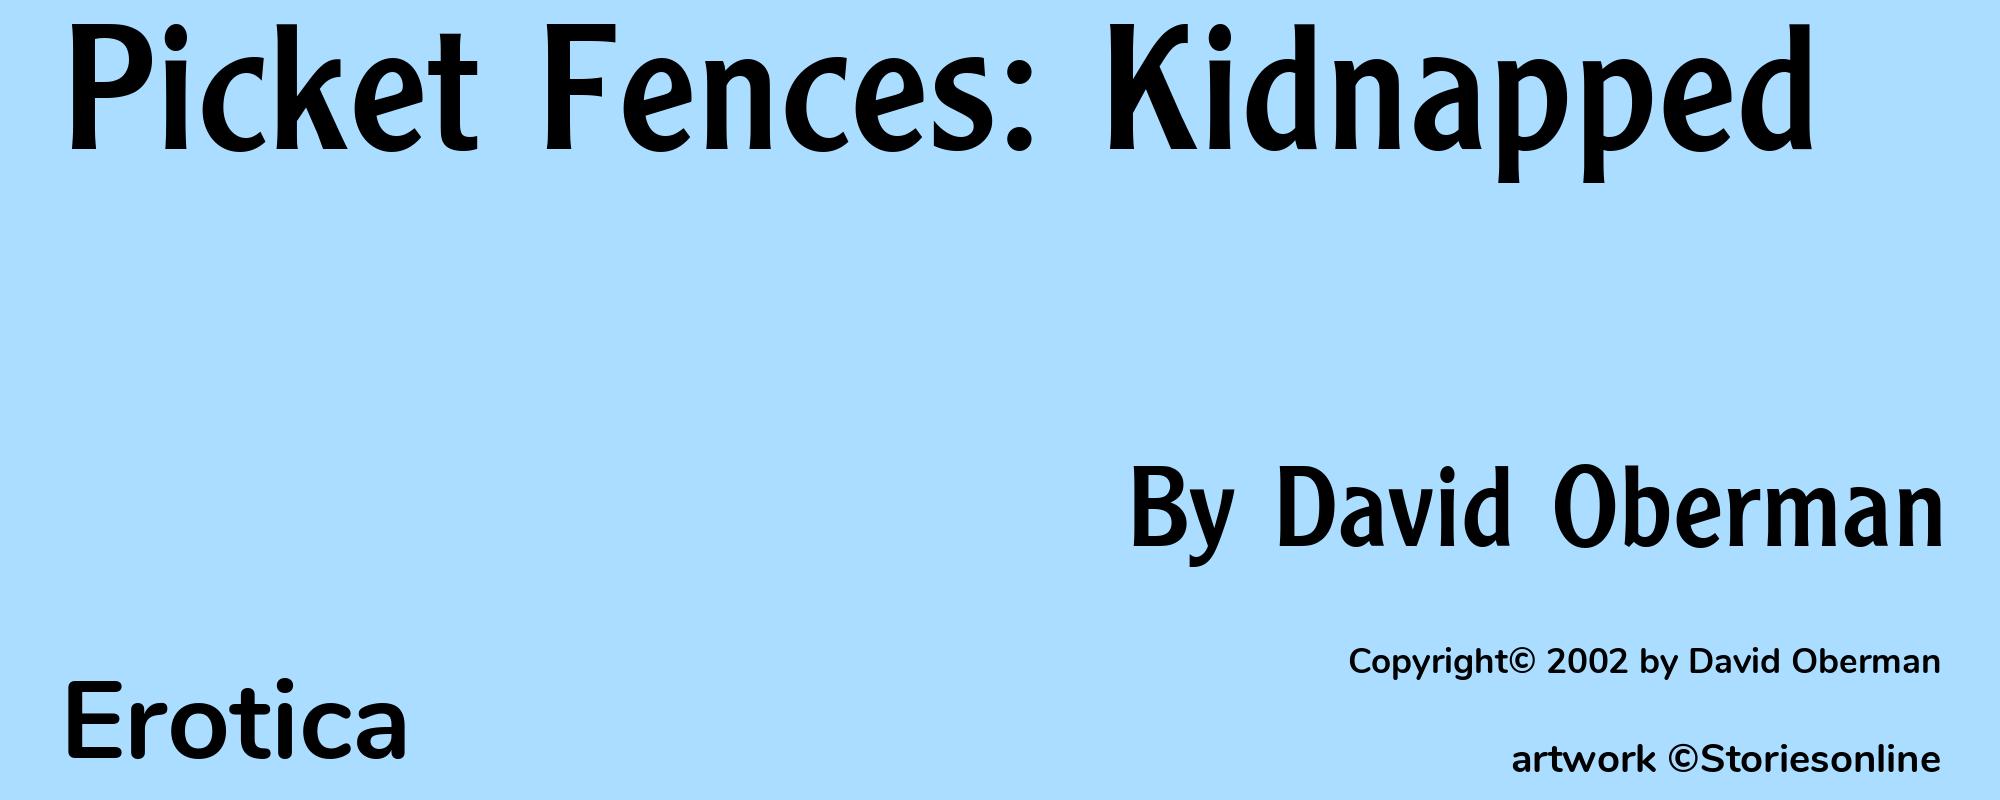 Picket Fences: Kidnapped - Cover